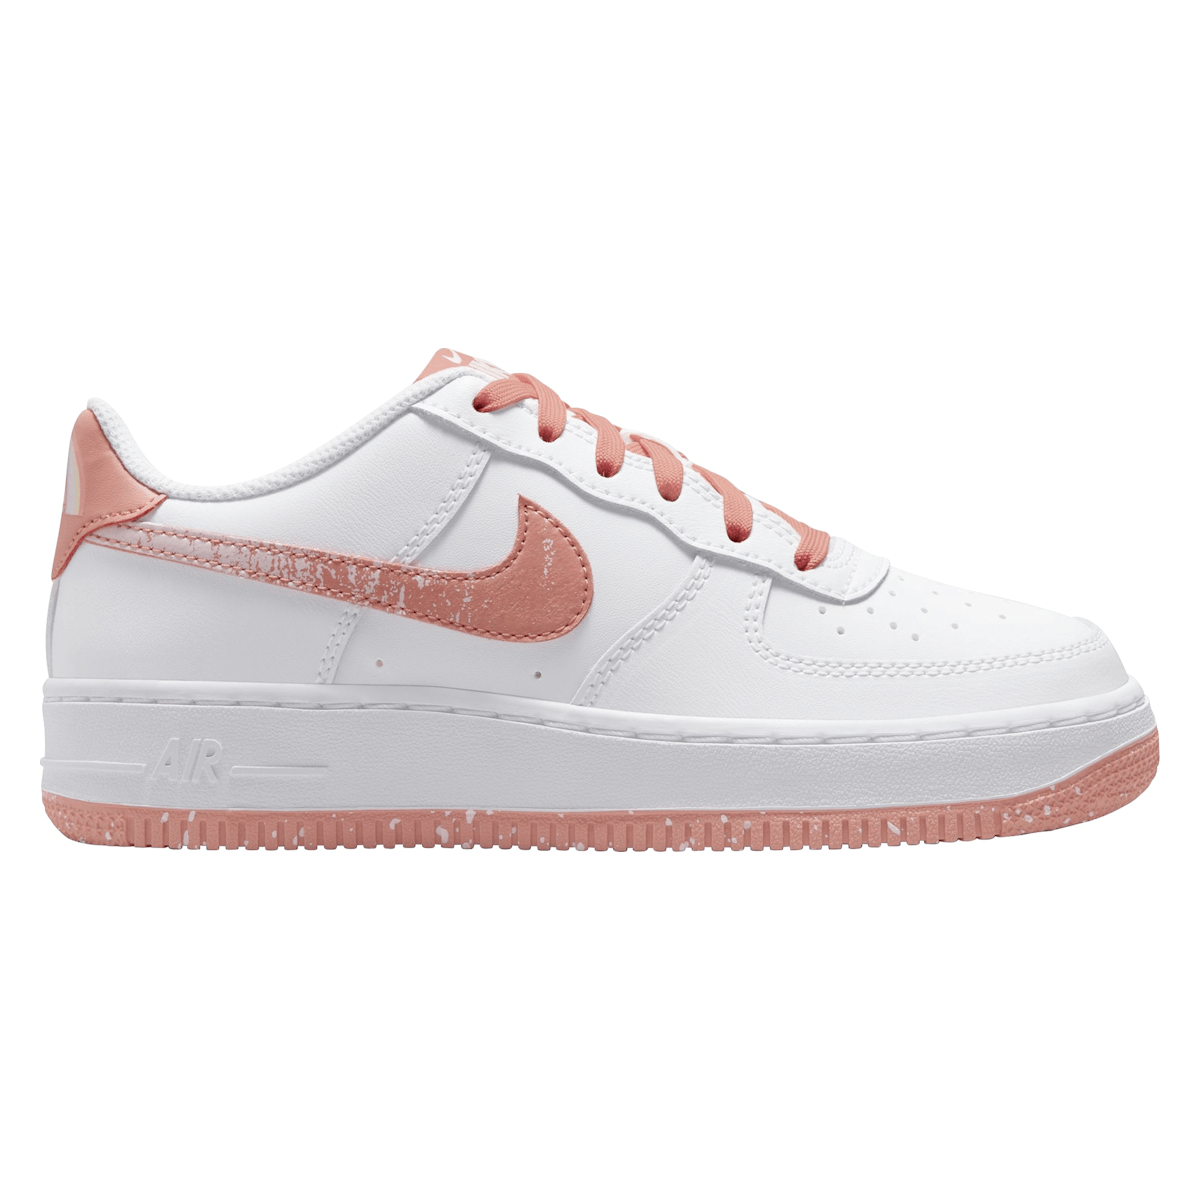 Nike Air Force 1 Low LV8 (GS) Eroded